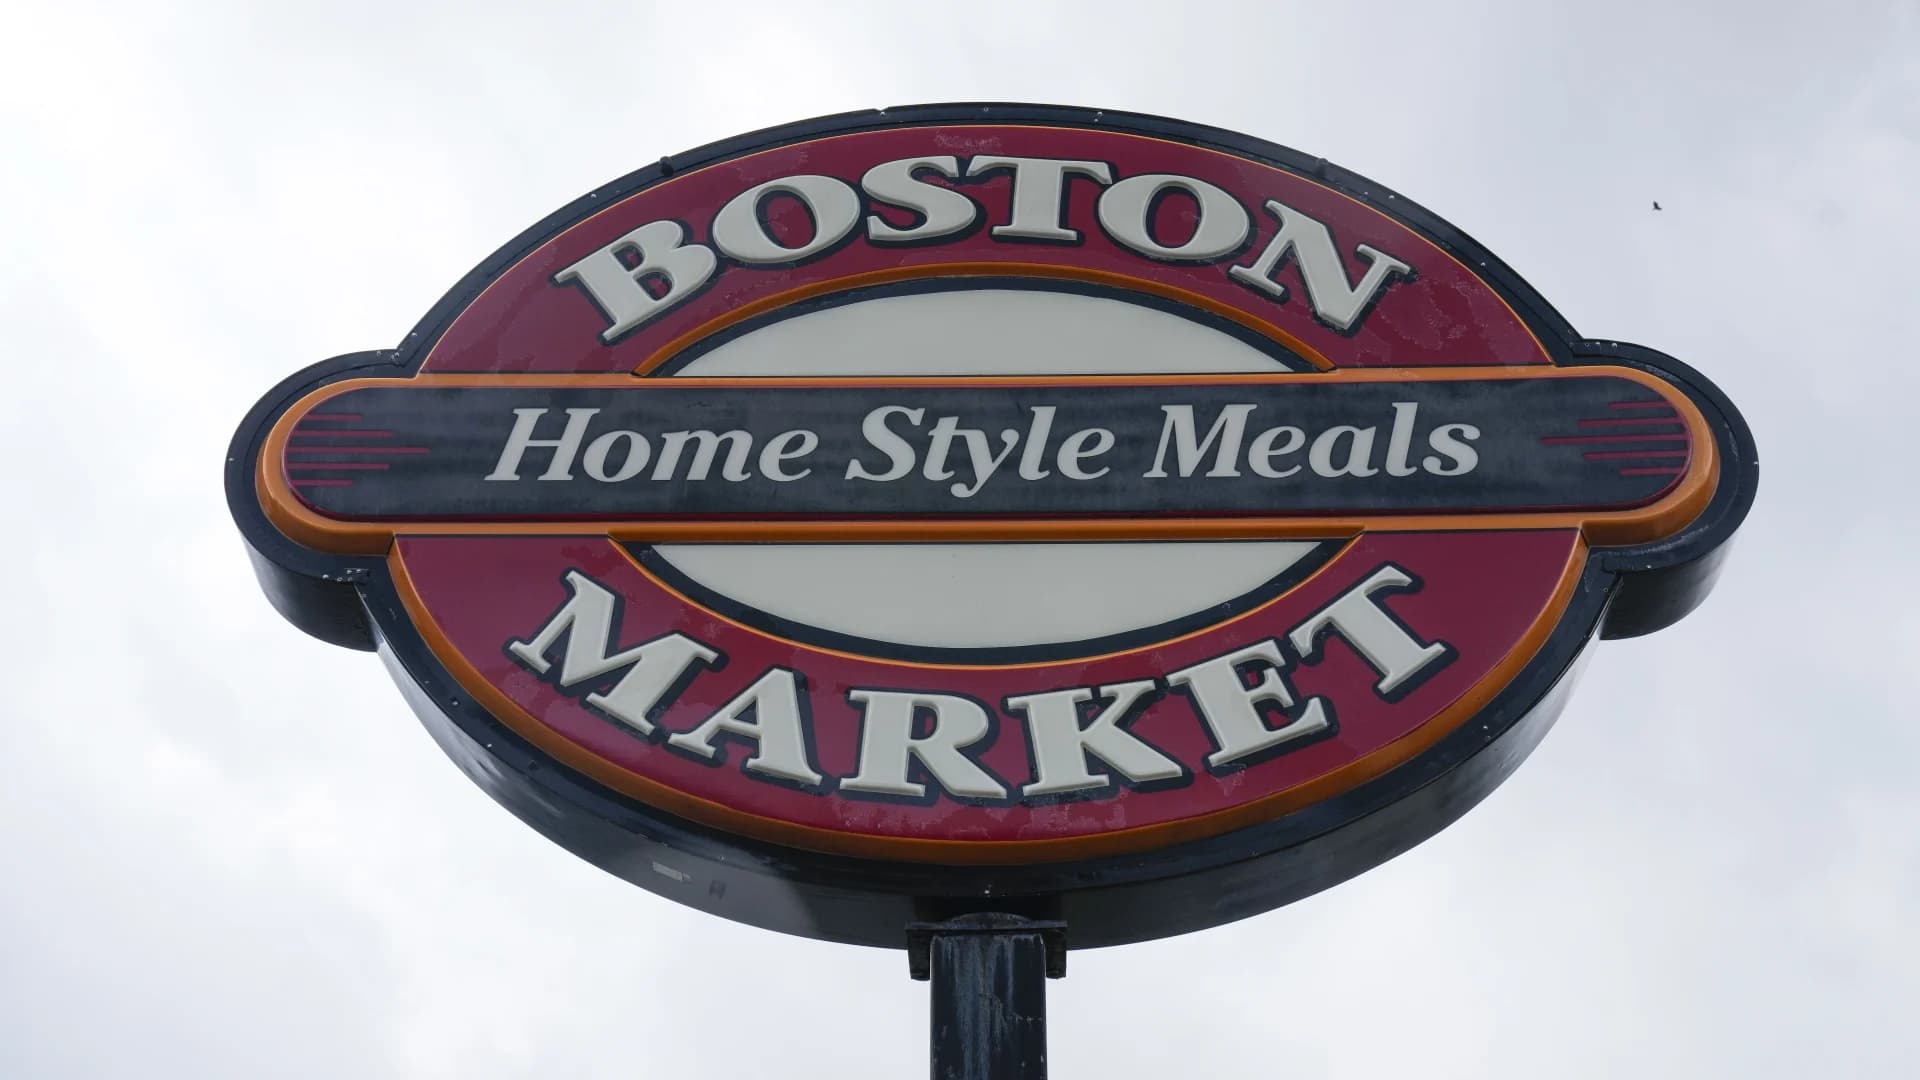 New Jersey shutters 27 Boston Market restaurants over accusations of unpaid wages, related worker issues